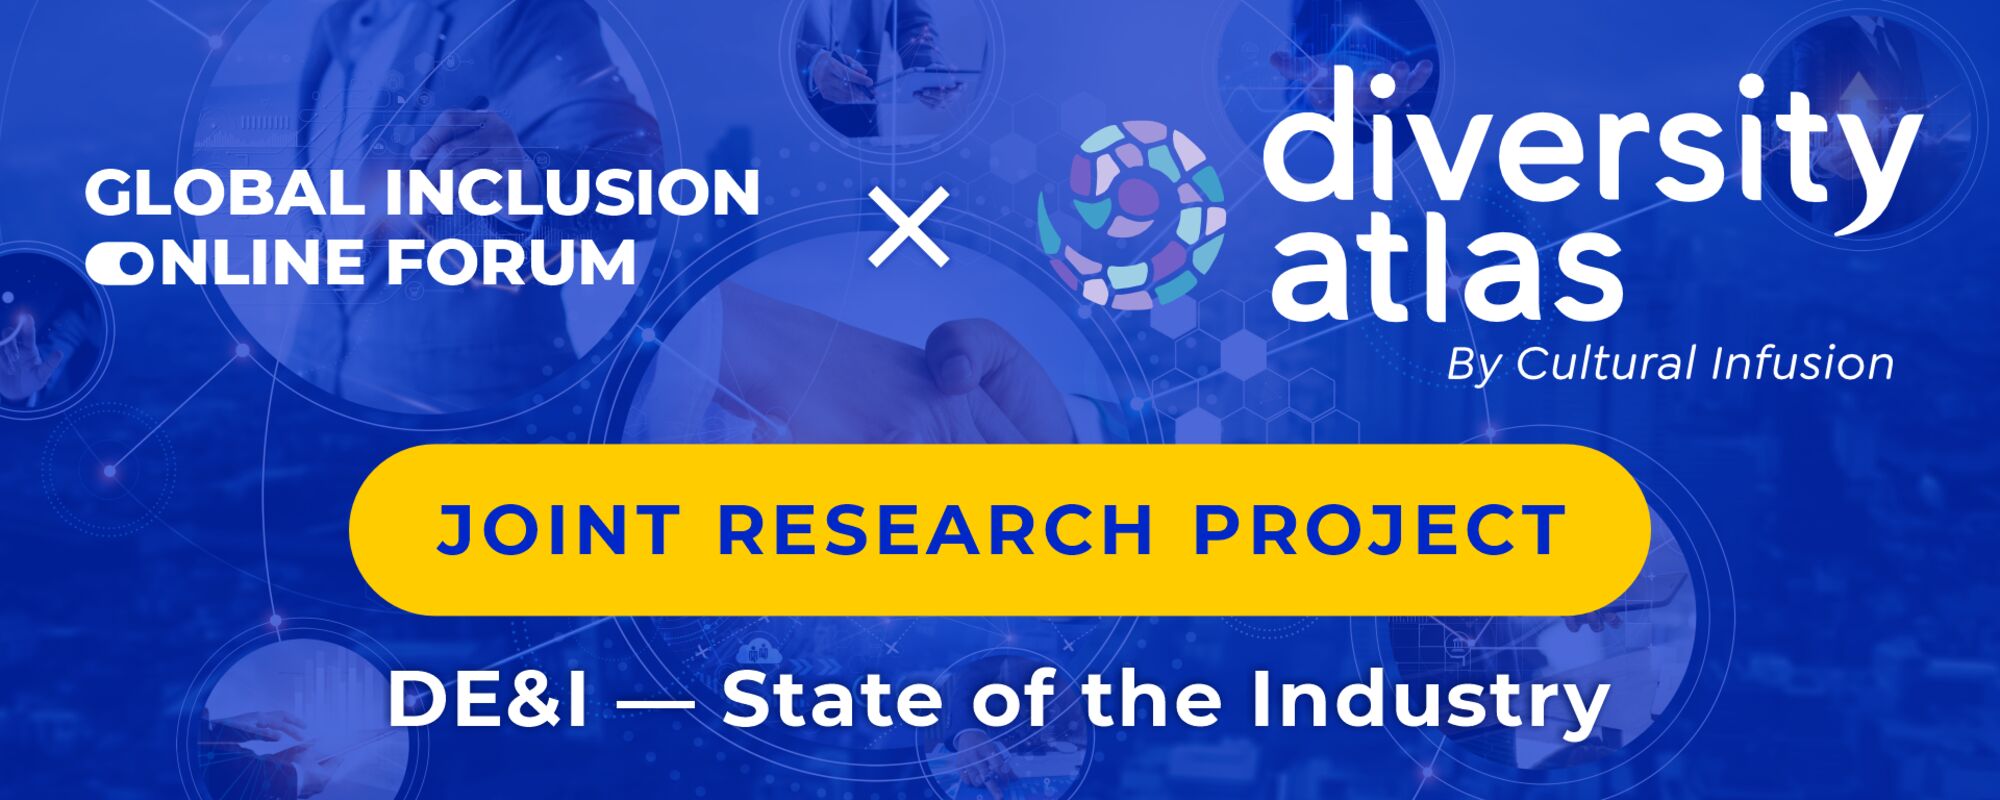 Global Inclusion Online Forum and Diversity Atlas Partner in DE&I Industry Research Project